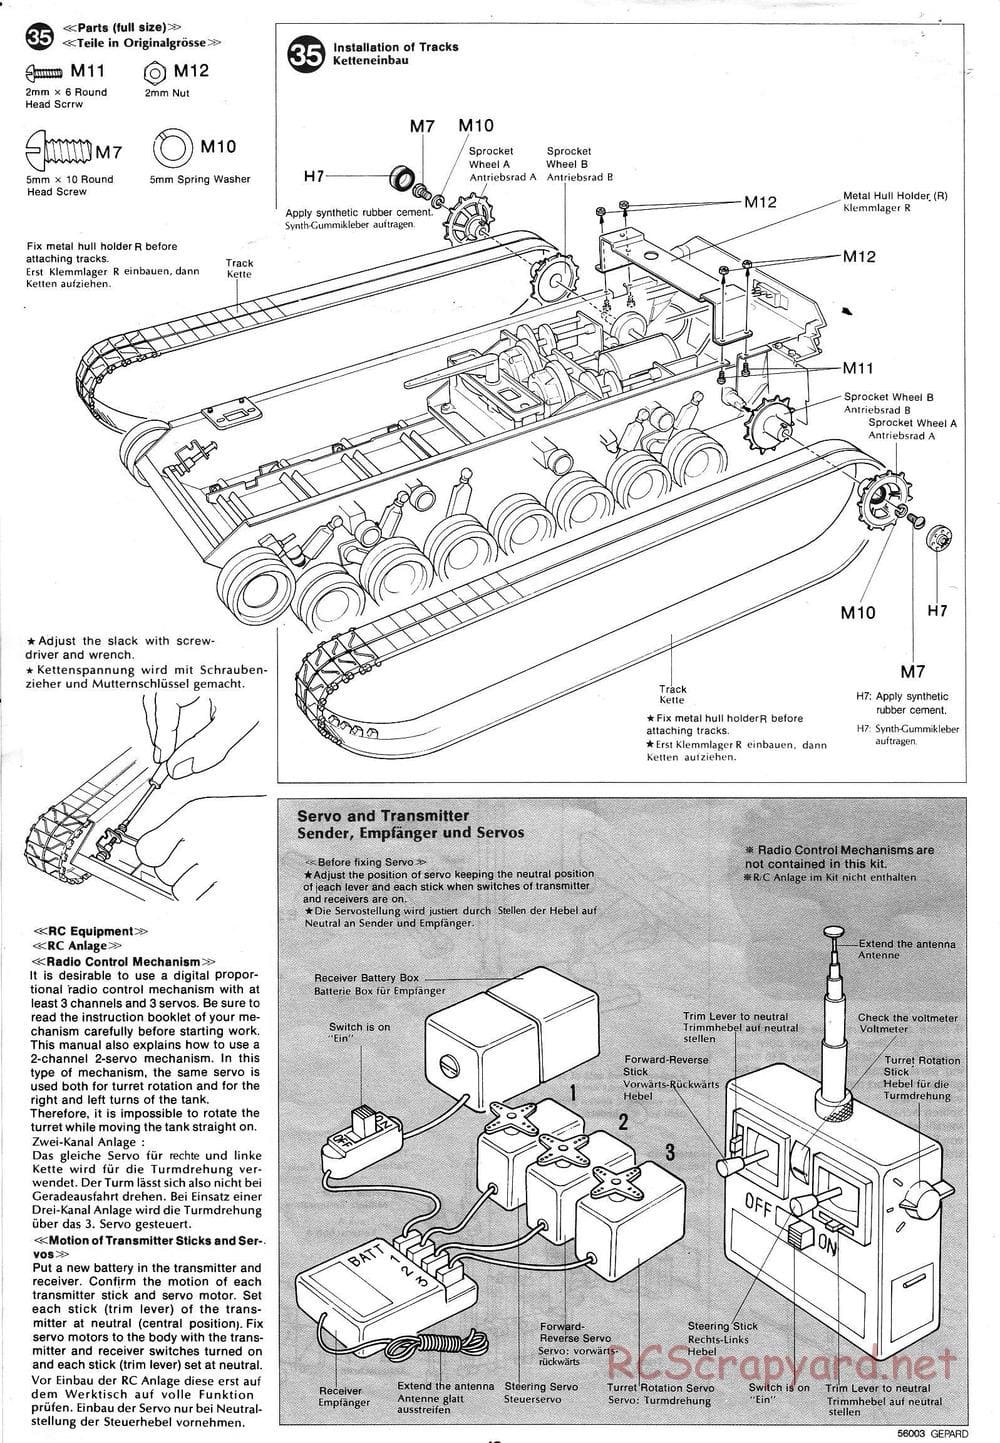 Tamiya - Flakpanzer Gepard - 1/16 Scale Chassis - Manual - Page 16